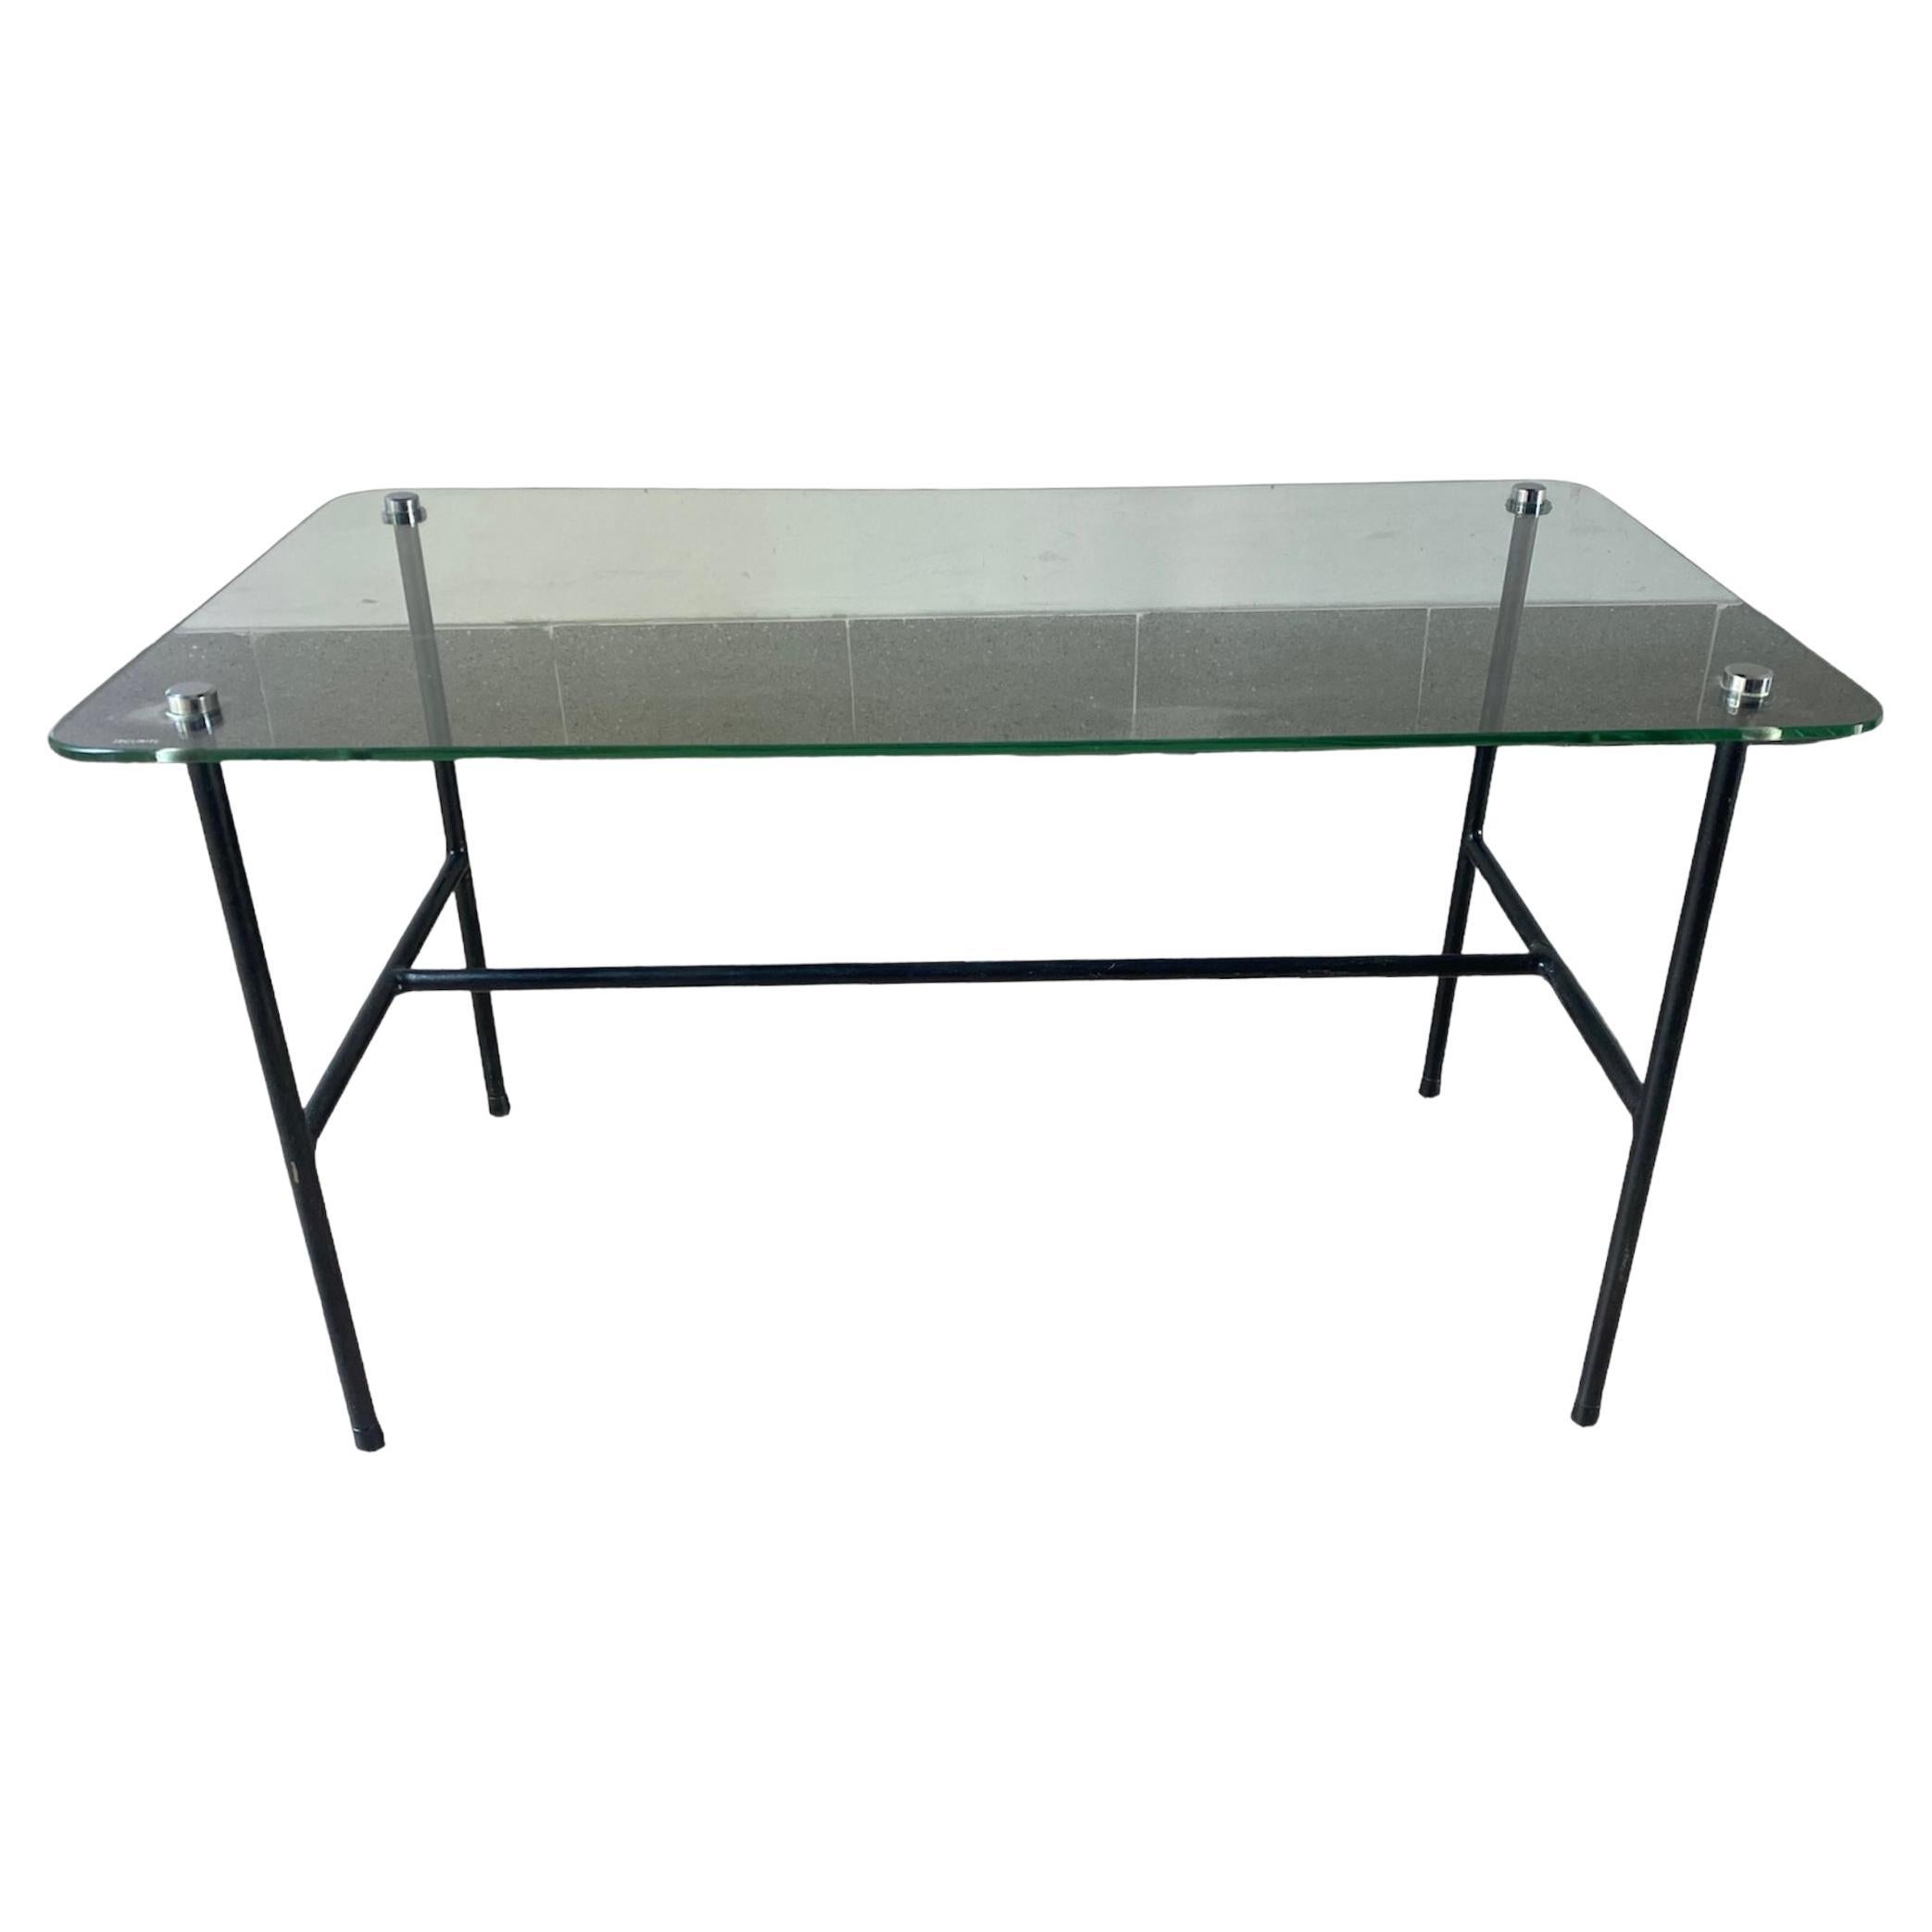 French Coffee Table Disderot Glass and Steel, Pierre Guariche, 1950 For Sale